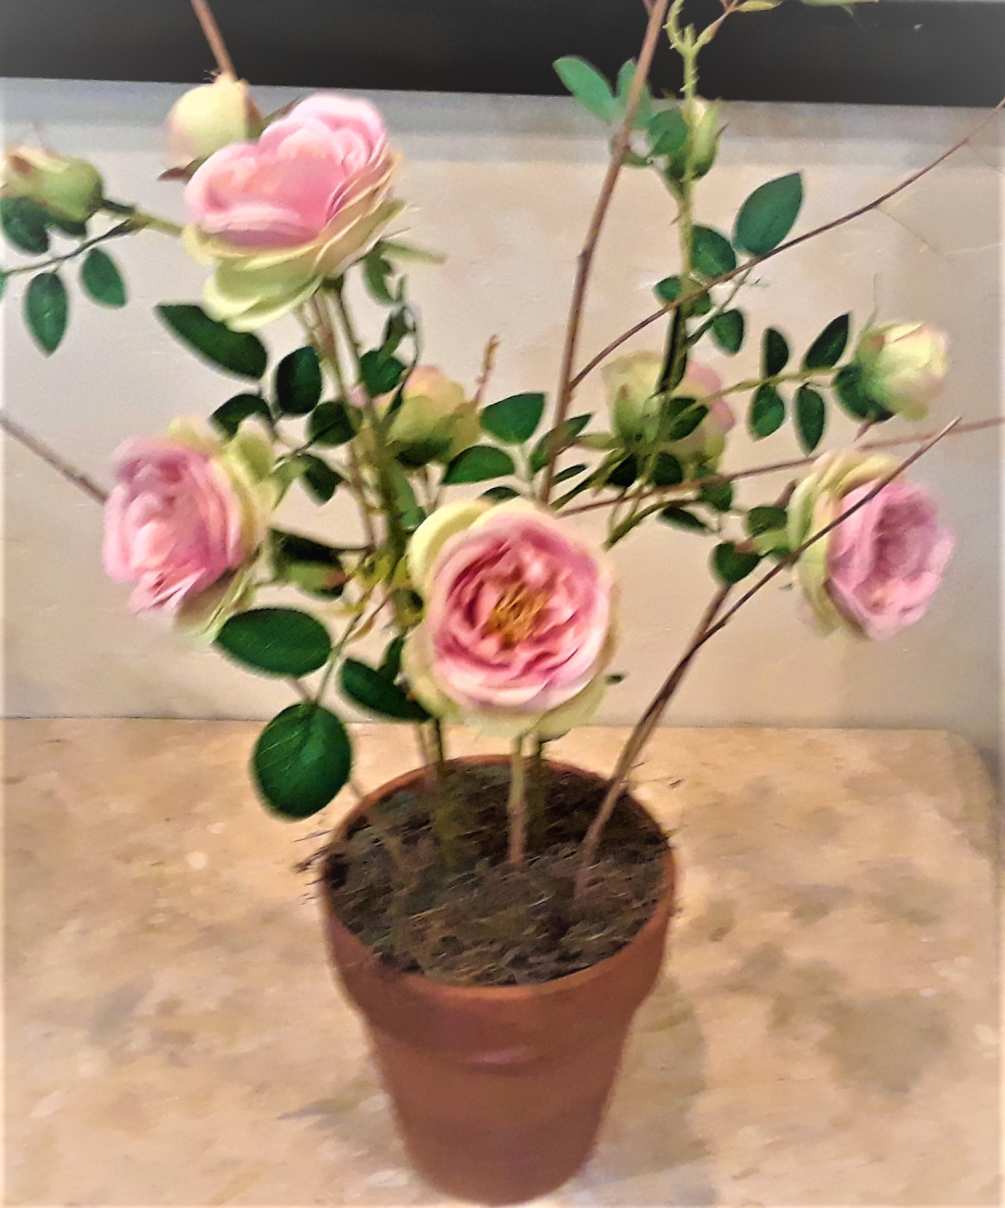 From our Permanent Botanicals collection, order this silk pink garden roses arrangement